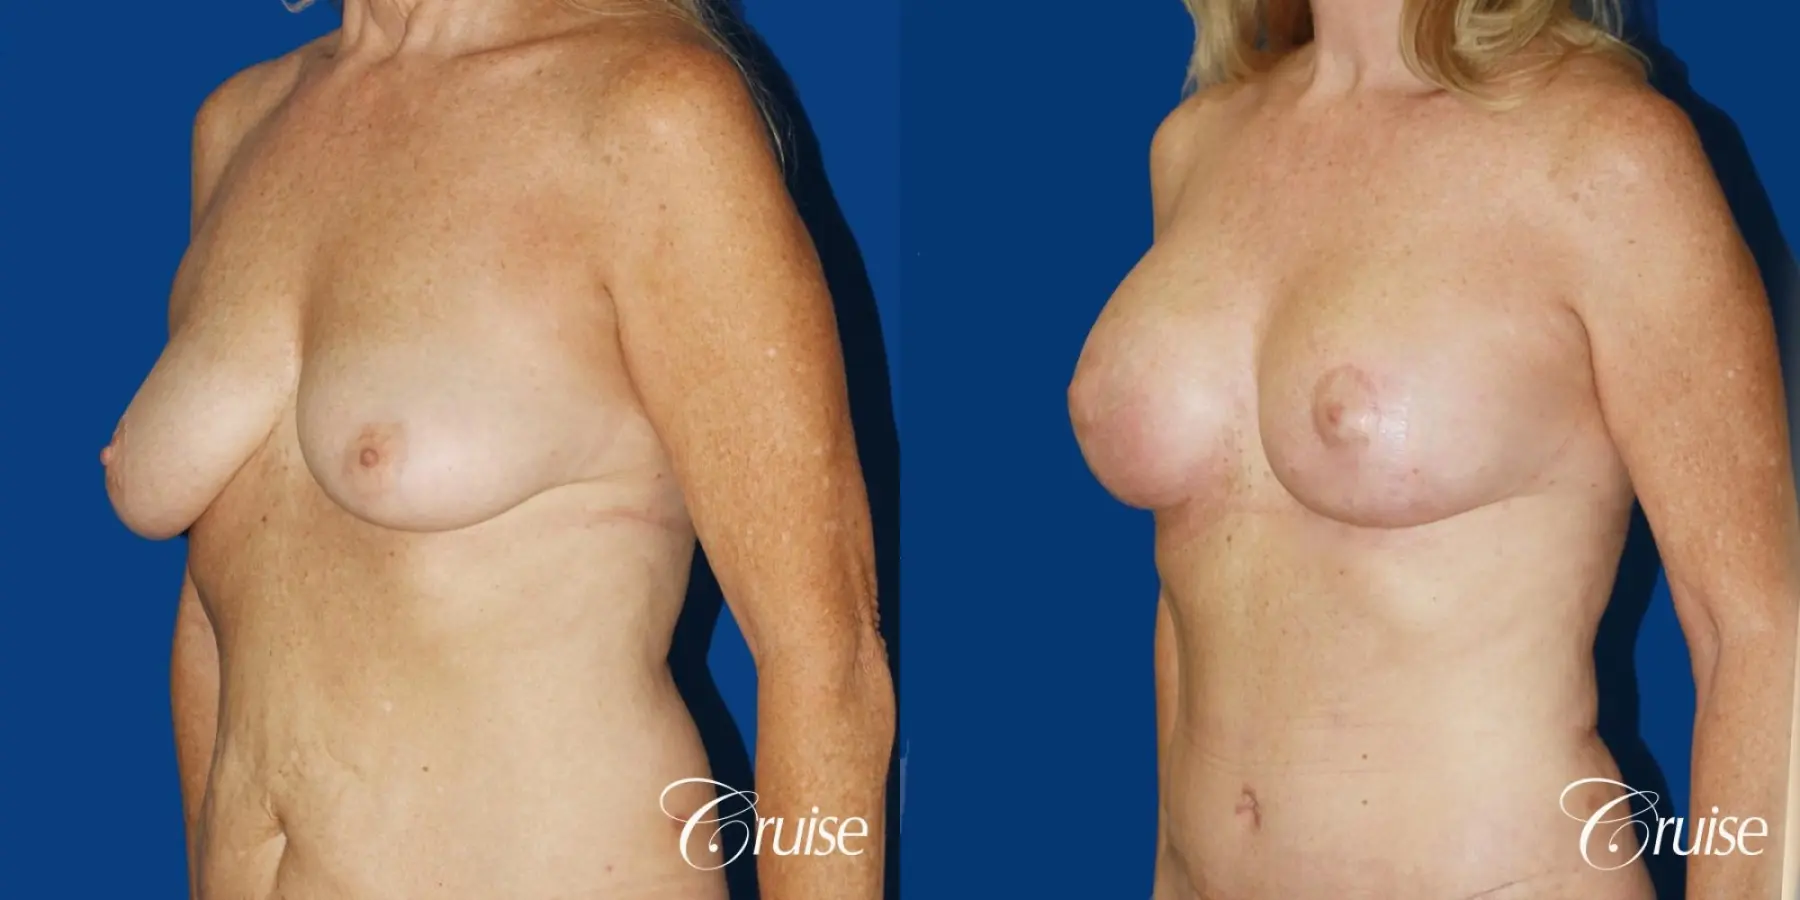 62 yr old woman with breast lift anchor and silicone implants - Before and After 3